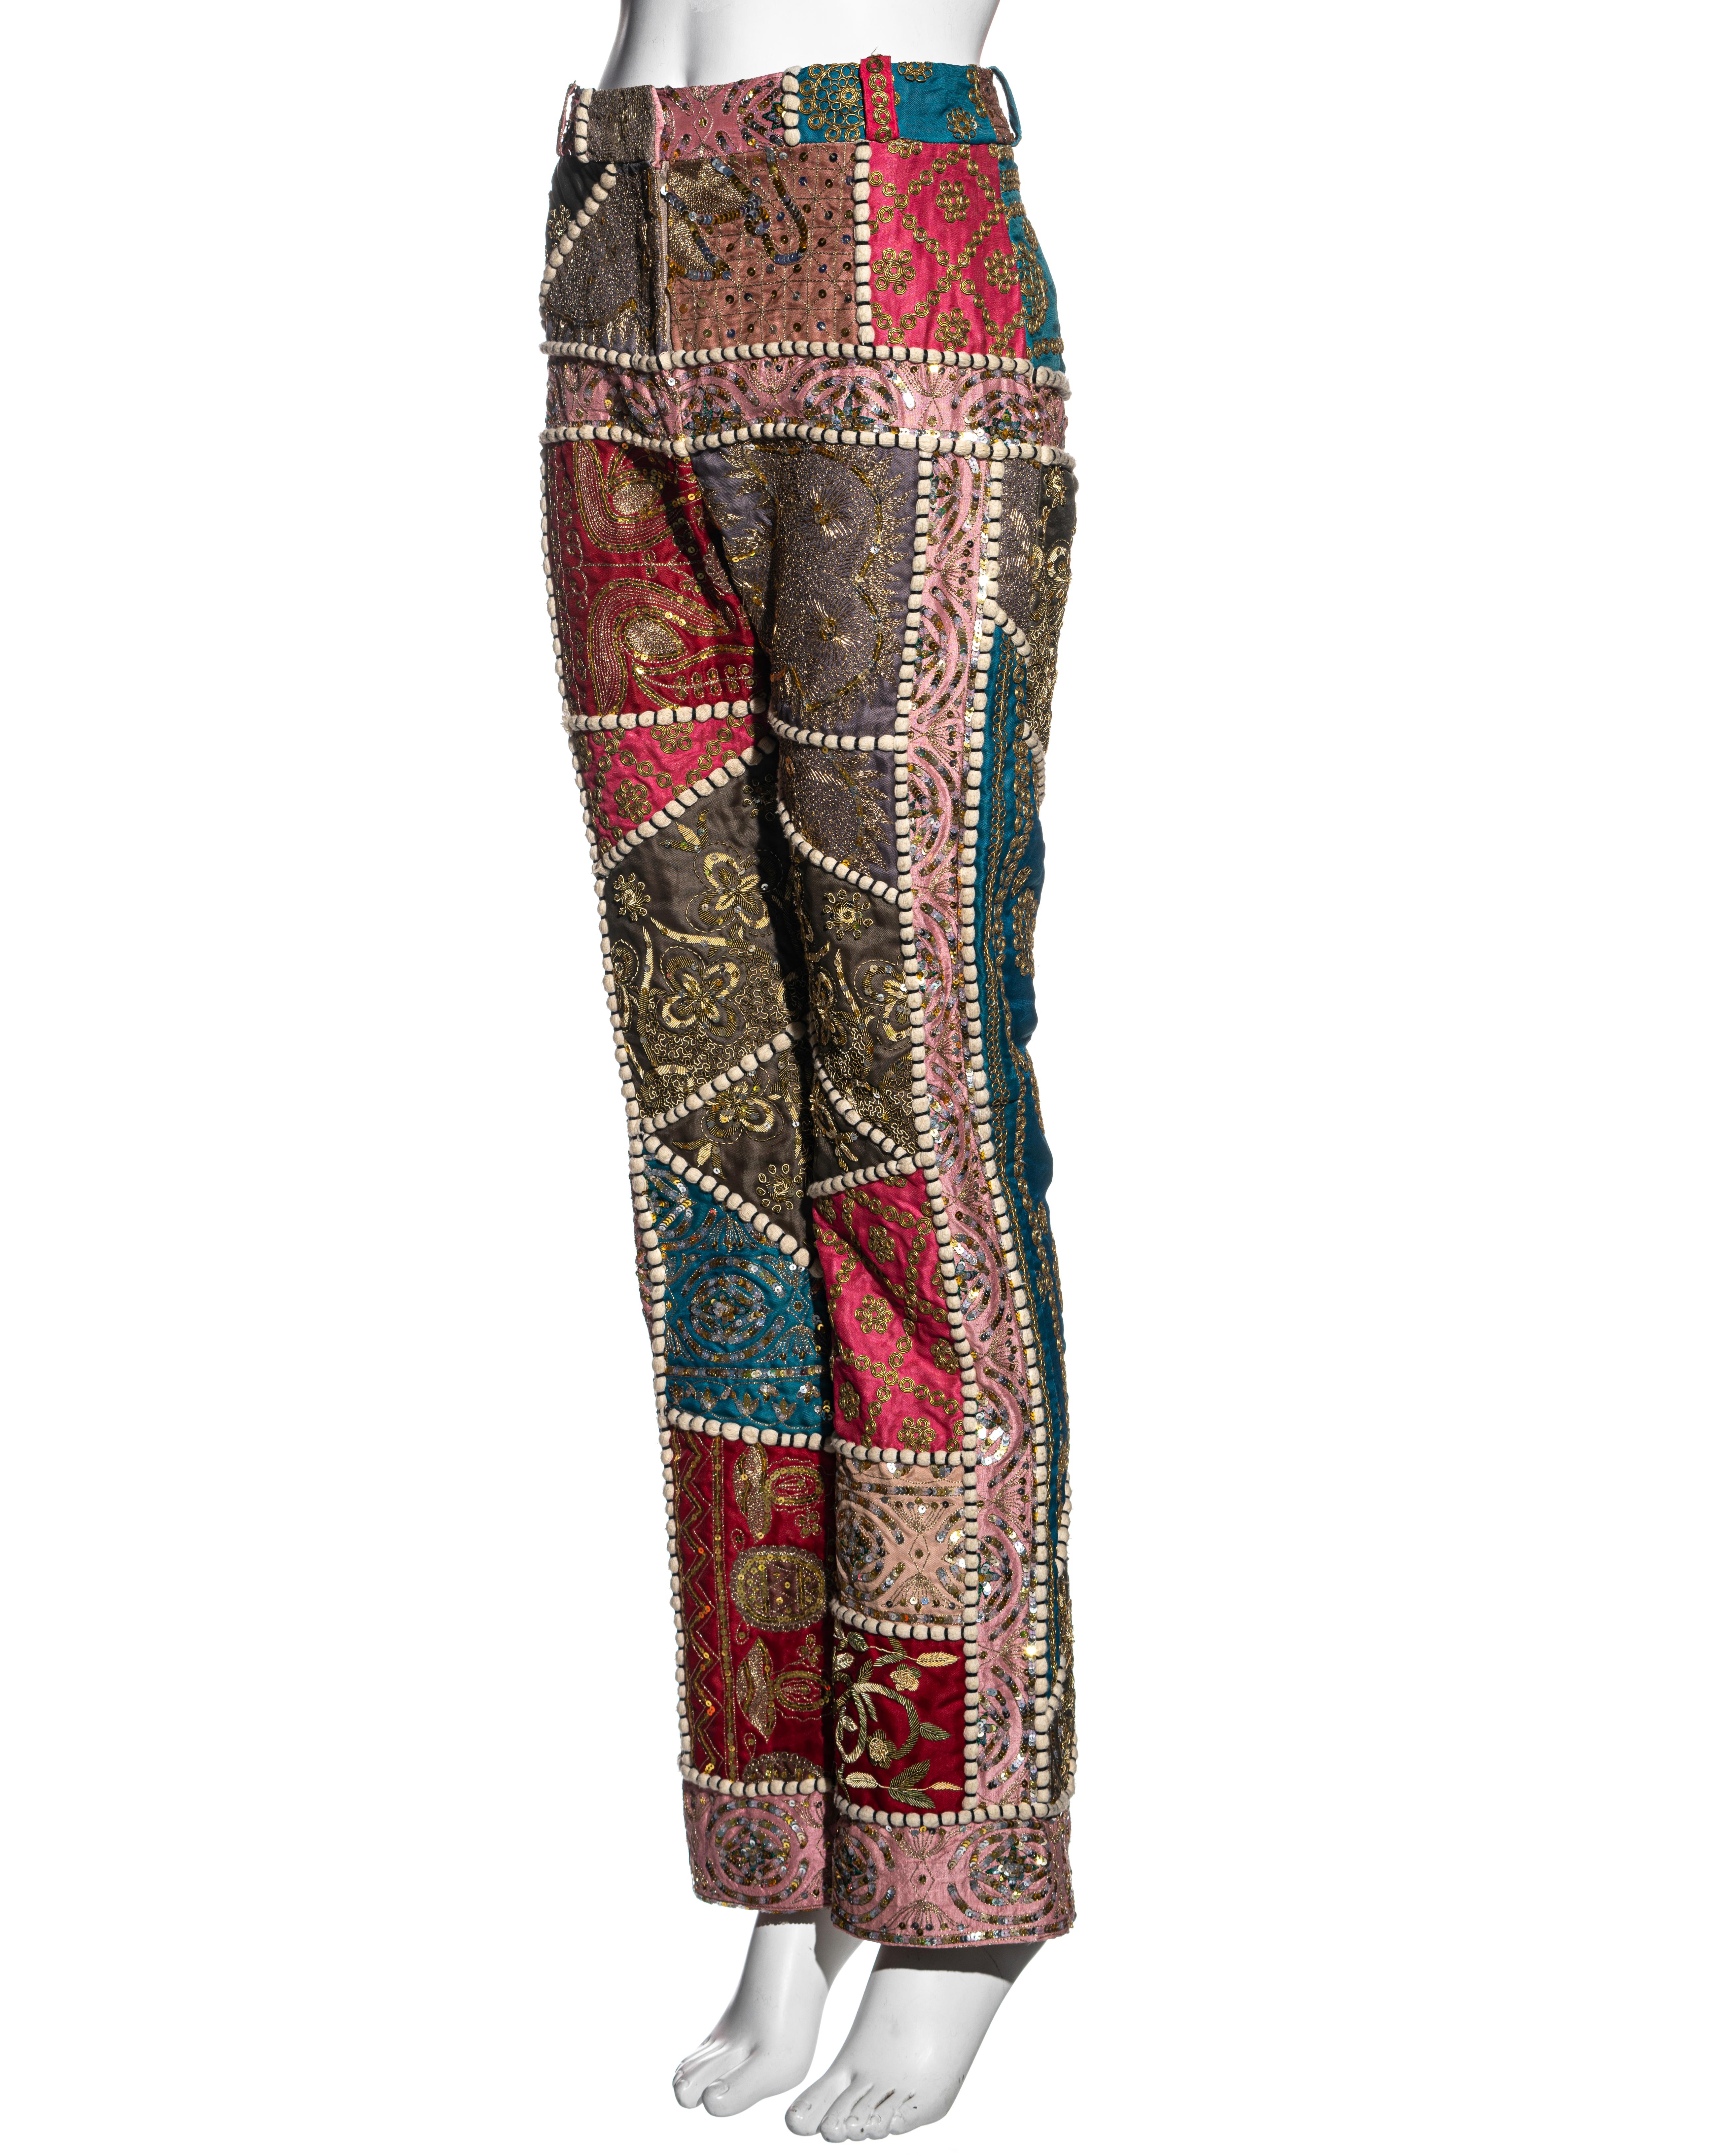 Gianfranco Ferre raw silk patchwork embroidered pants, ss 2002 For Sale 2